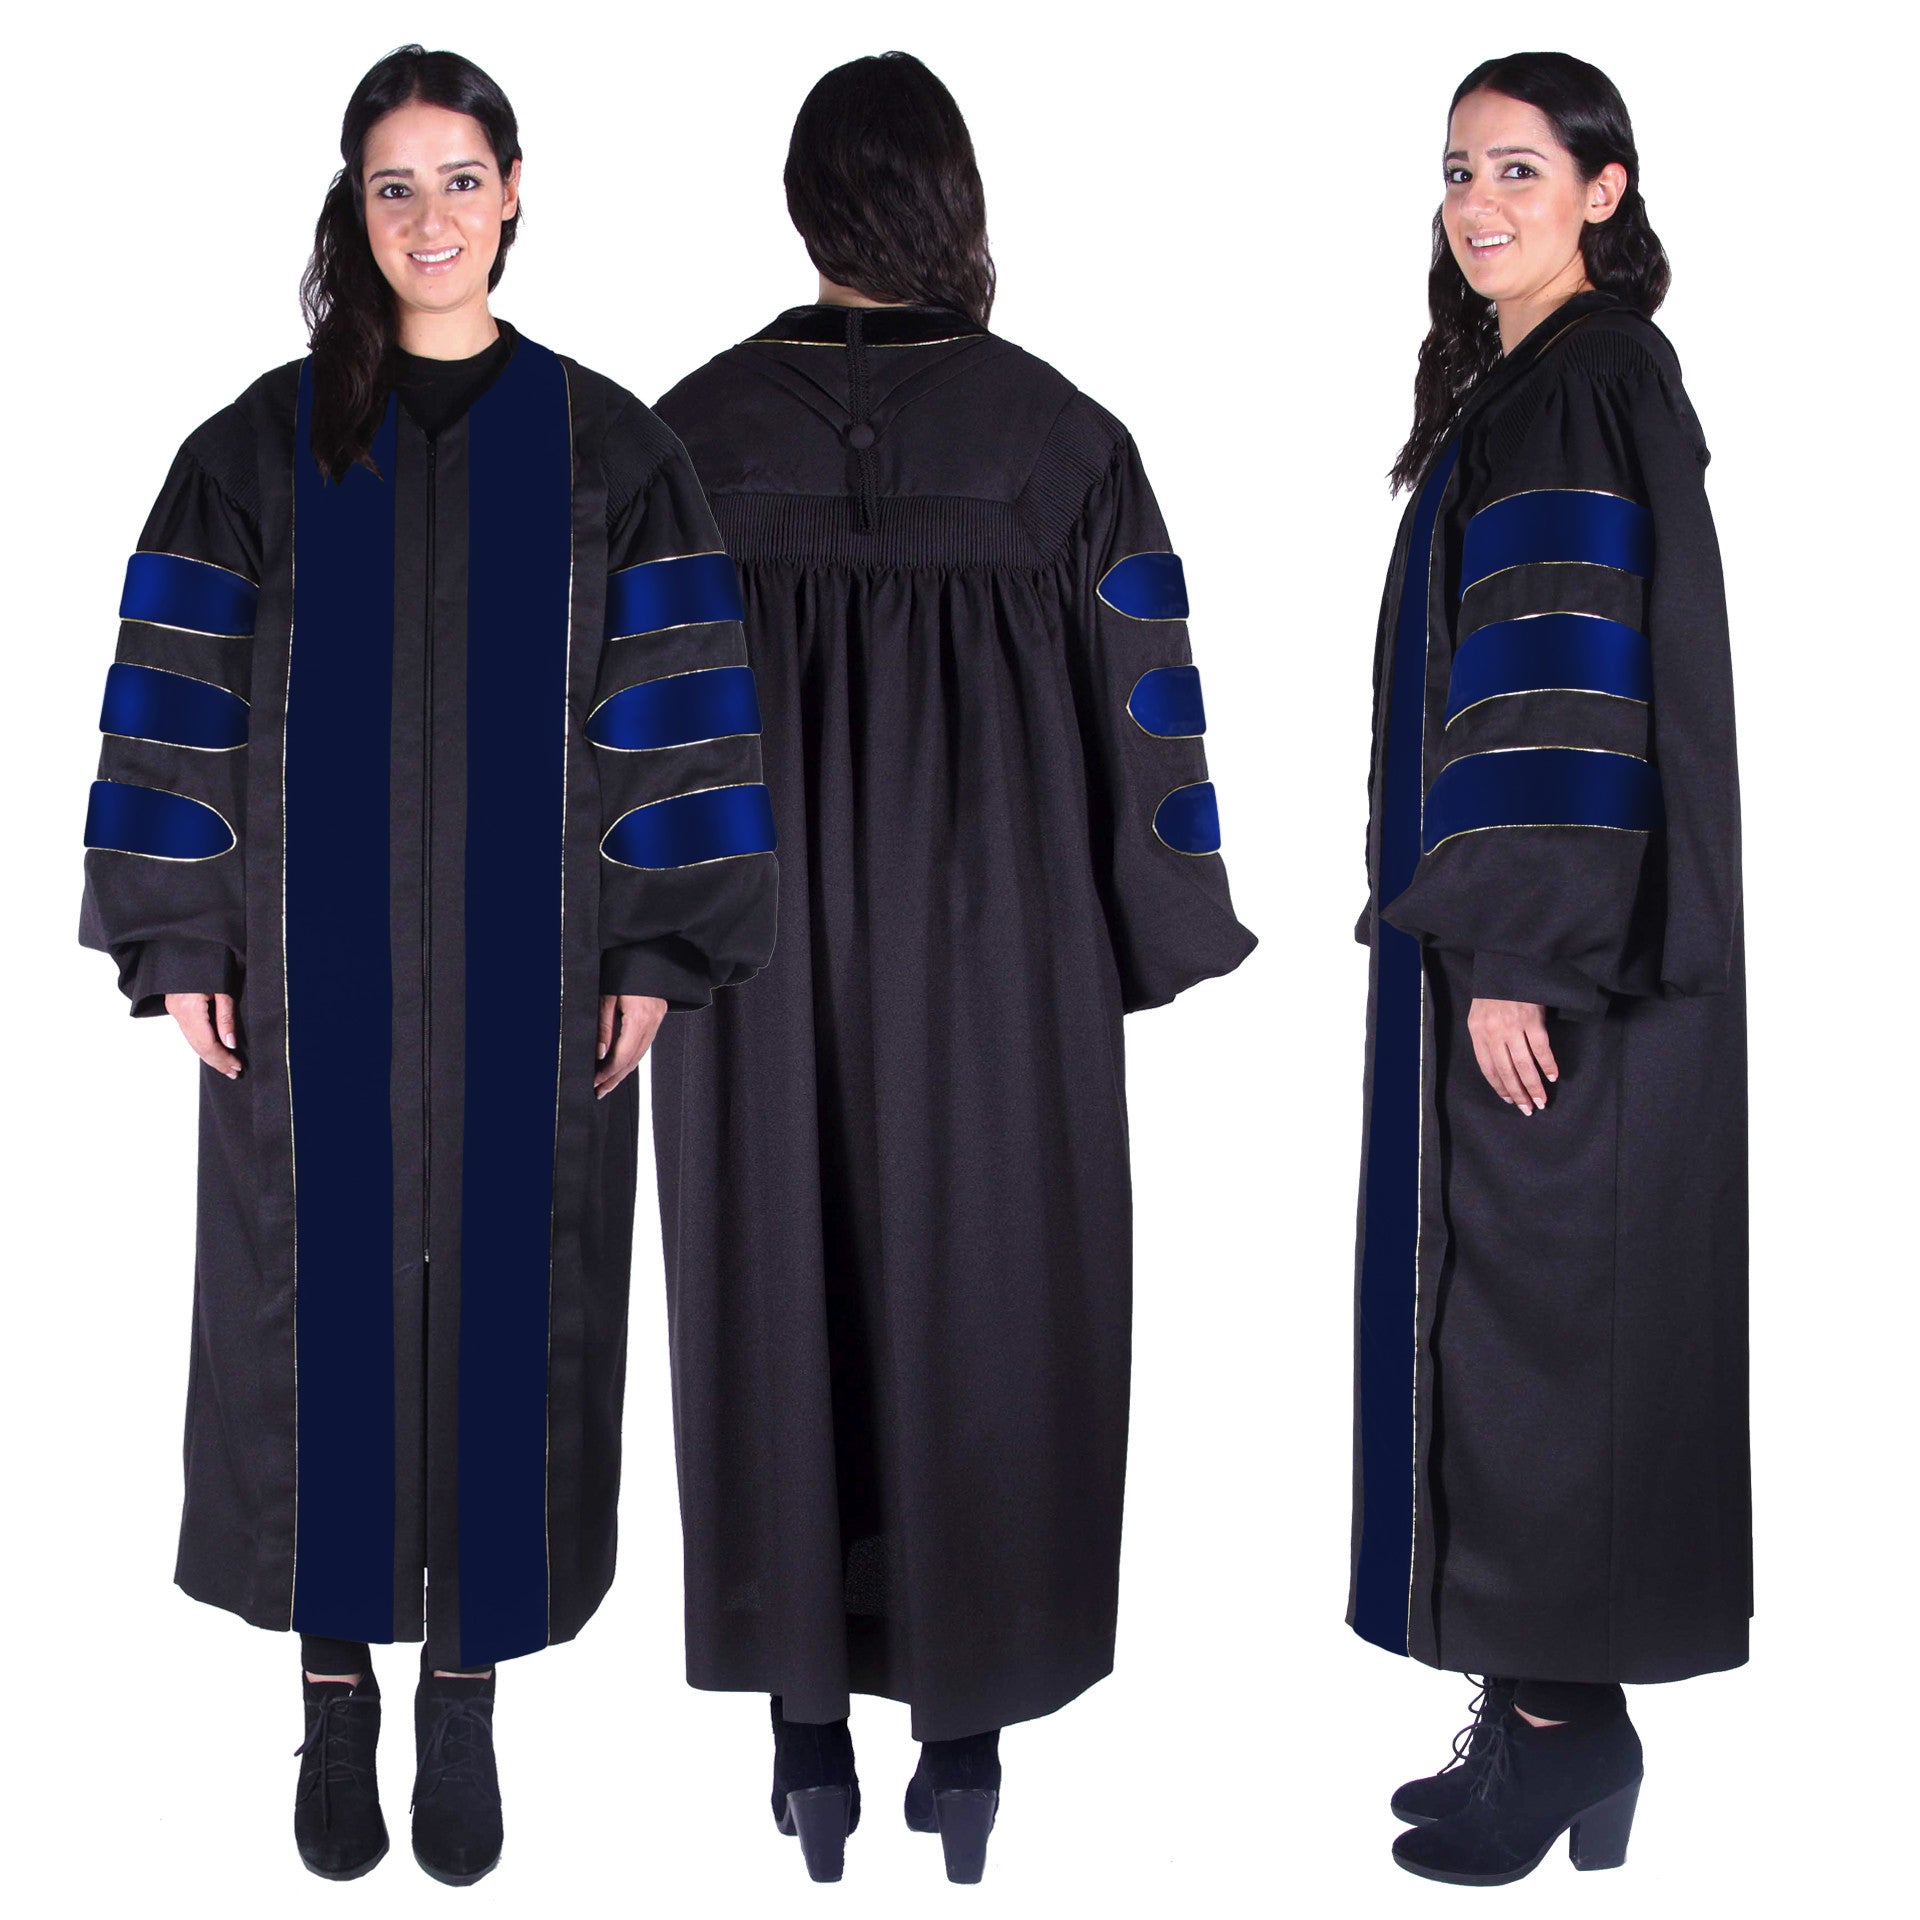 Premium PhD Gown and Tam